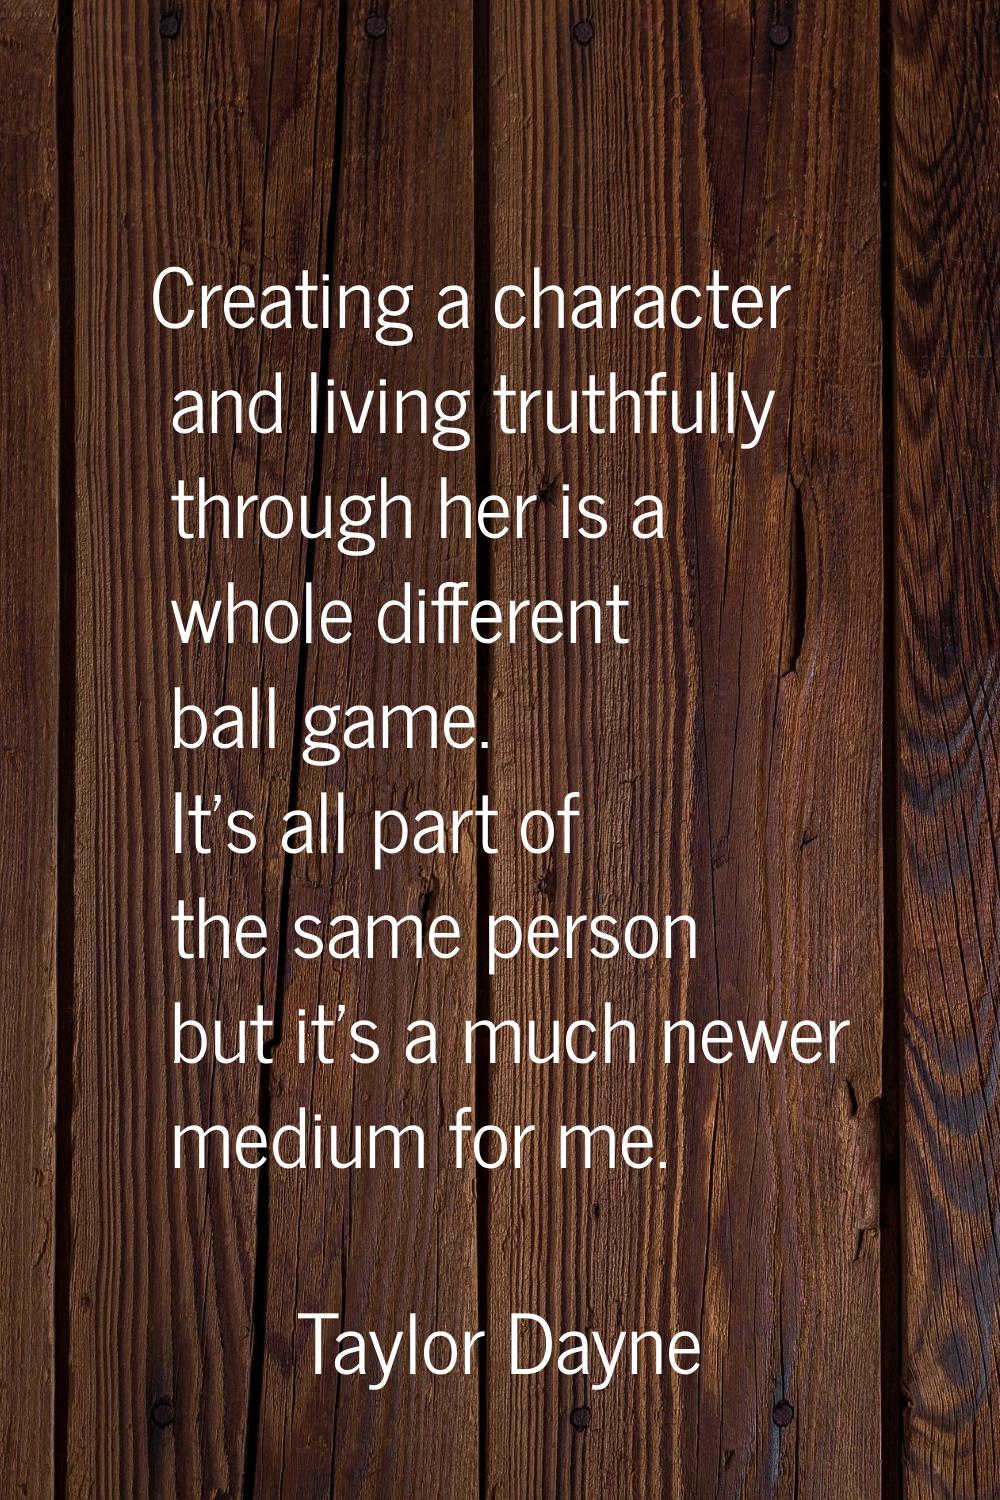 Creating a character and living truthfully through her is a whole different ball game. It's all par